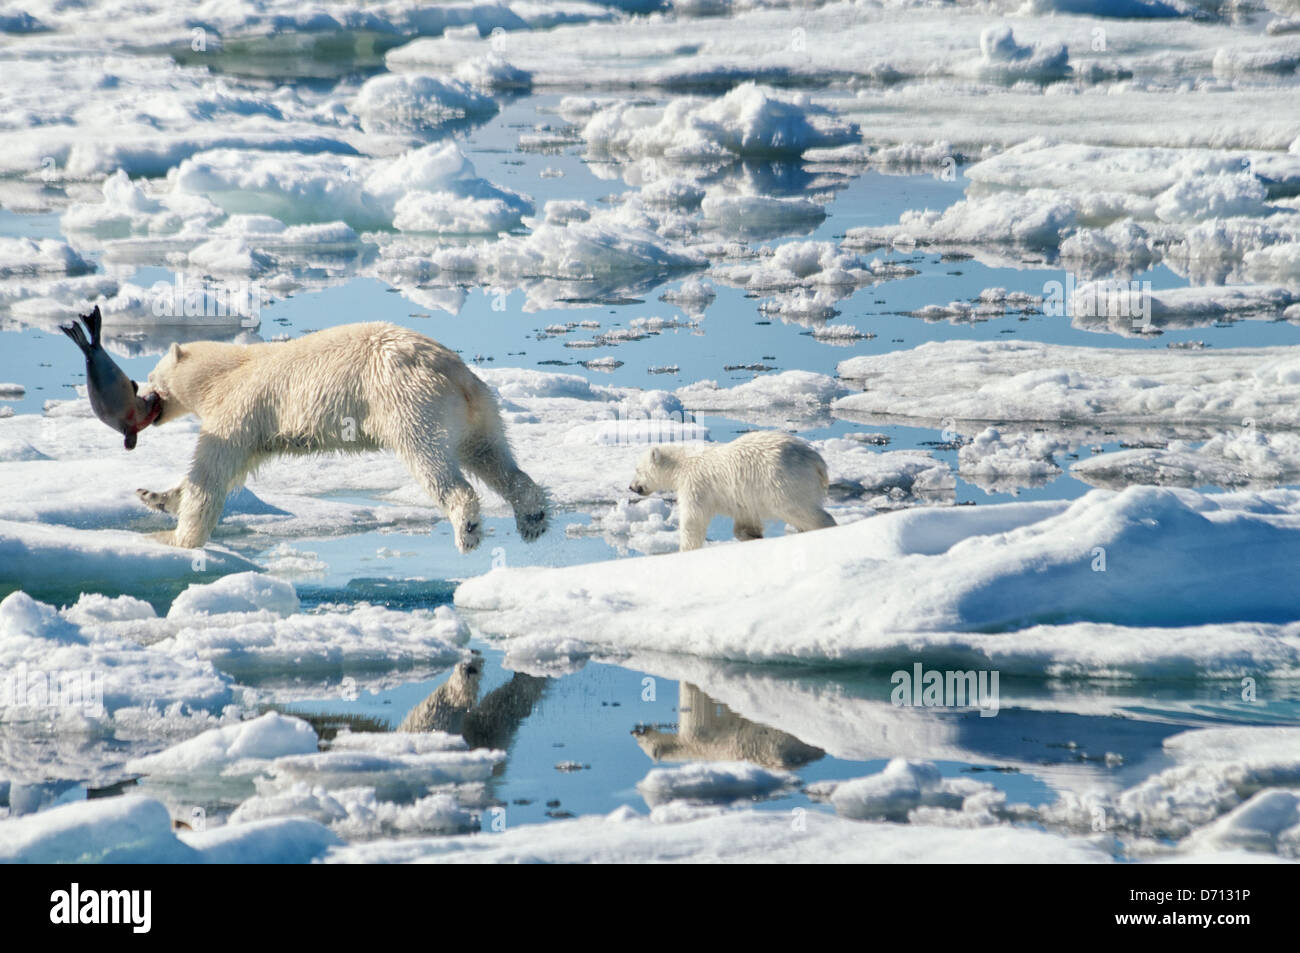 #6 in a series of images of a mother Polar Bear, Ursus maritimus, stalking a Seal to feed her twin Cubs, Svalbard, Norway. Search 'PBHunt' for all. Stock Photo